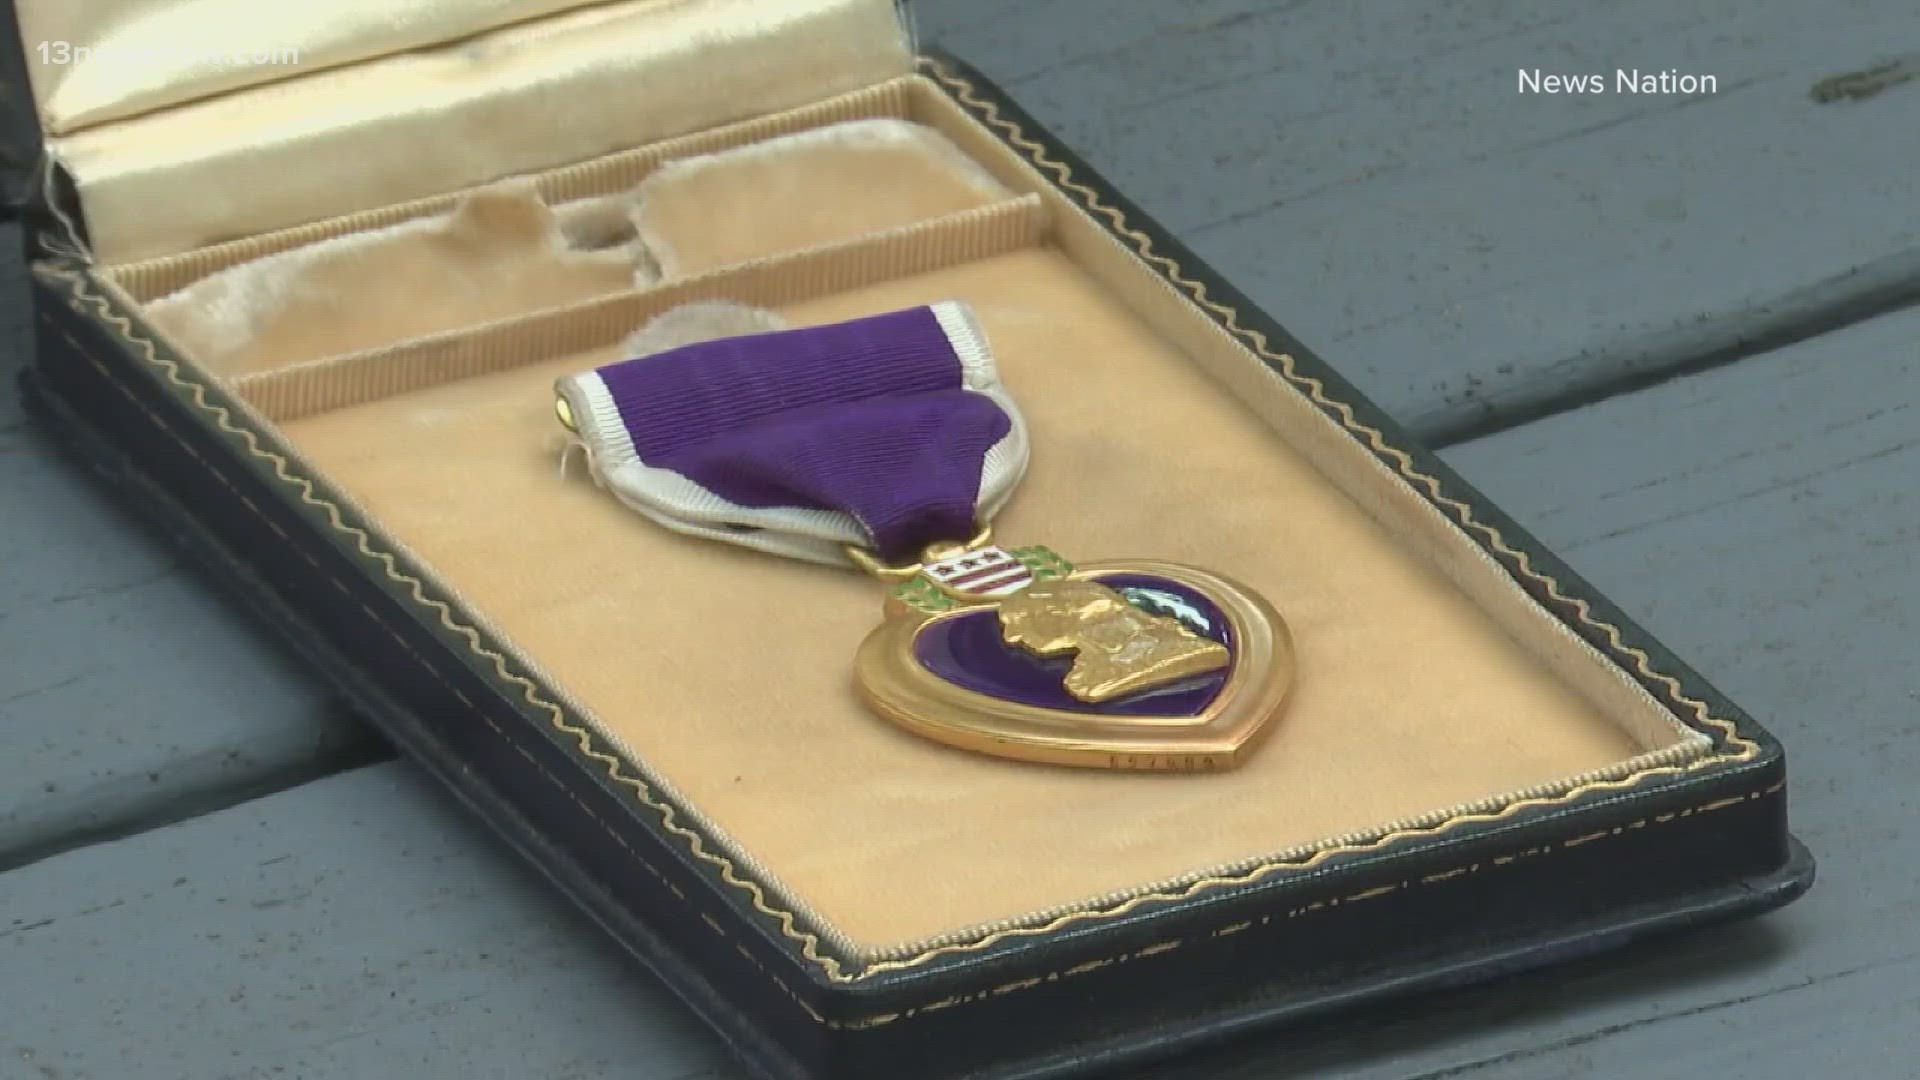 A fellow veteran found the medal at a flea market and was able to track down Nicholas Wargo's family to return it to them.